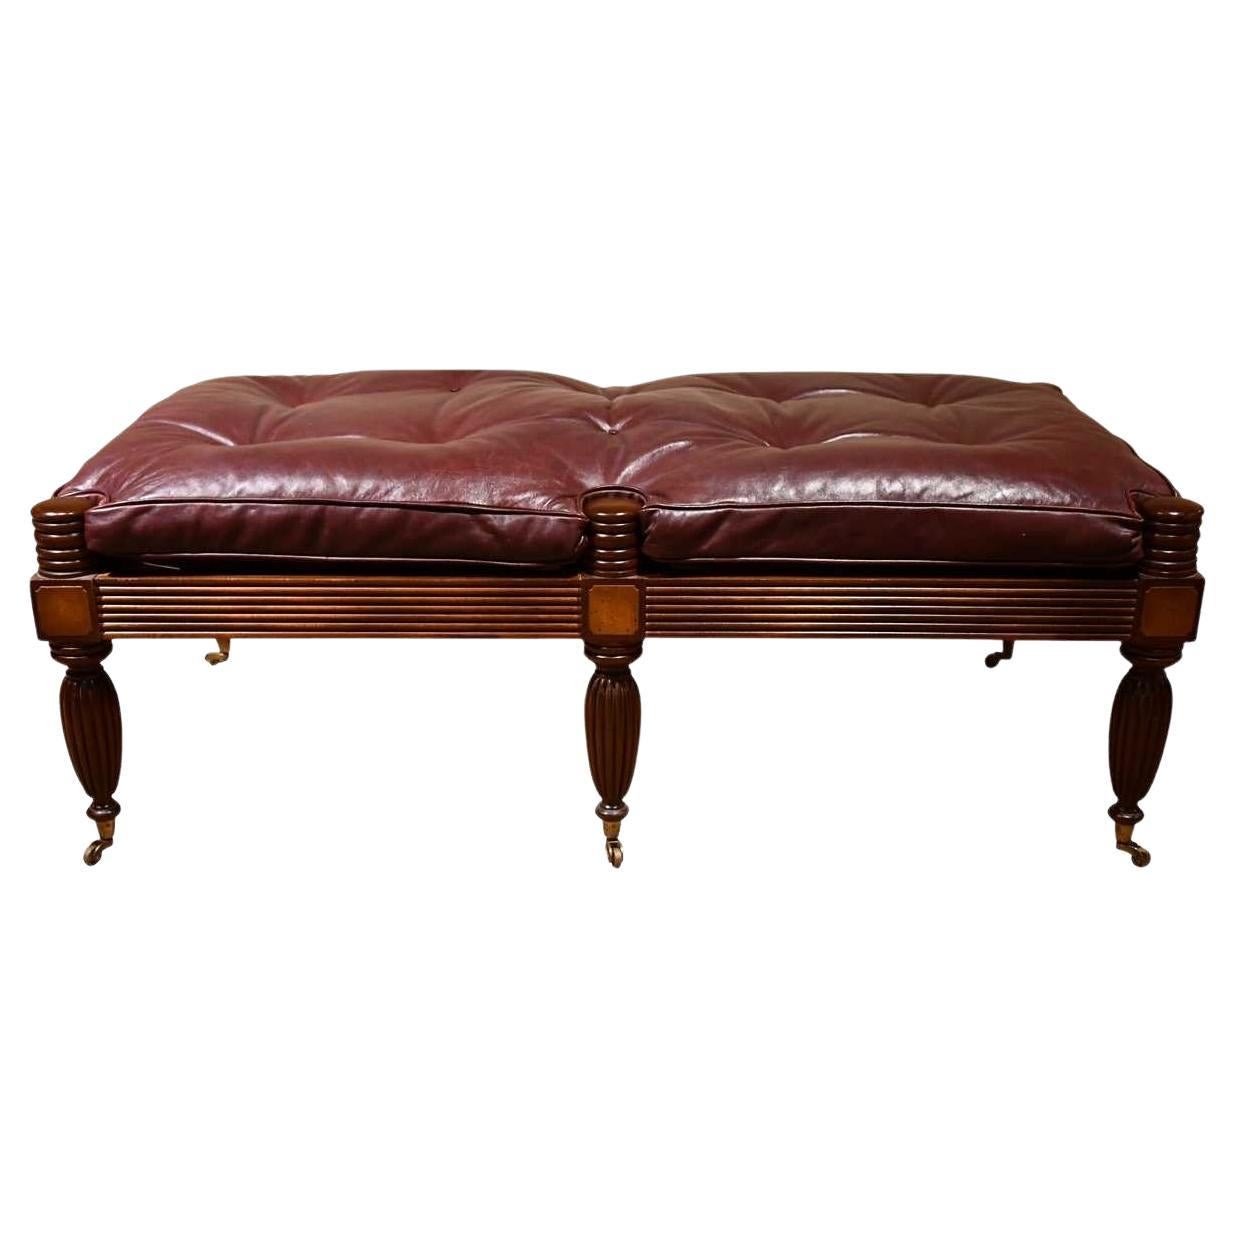 Attractive Regency Style Mahogany Bench with Button Tufted Leather Squab For Sale